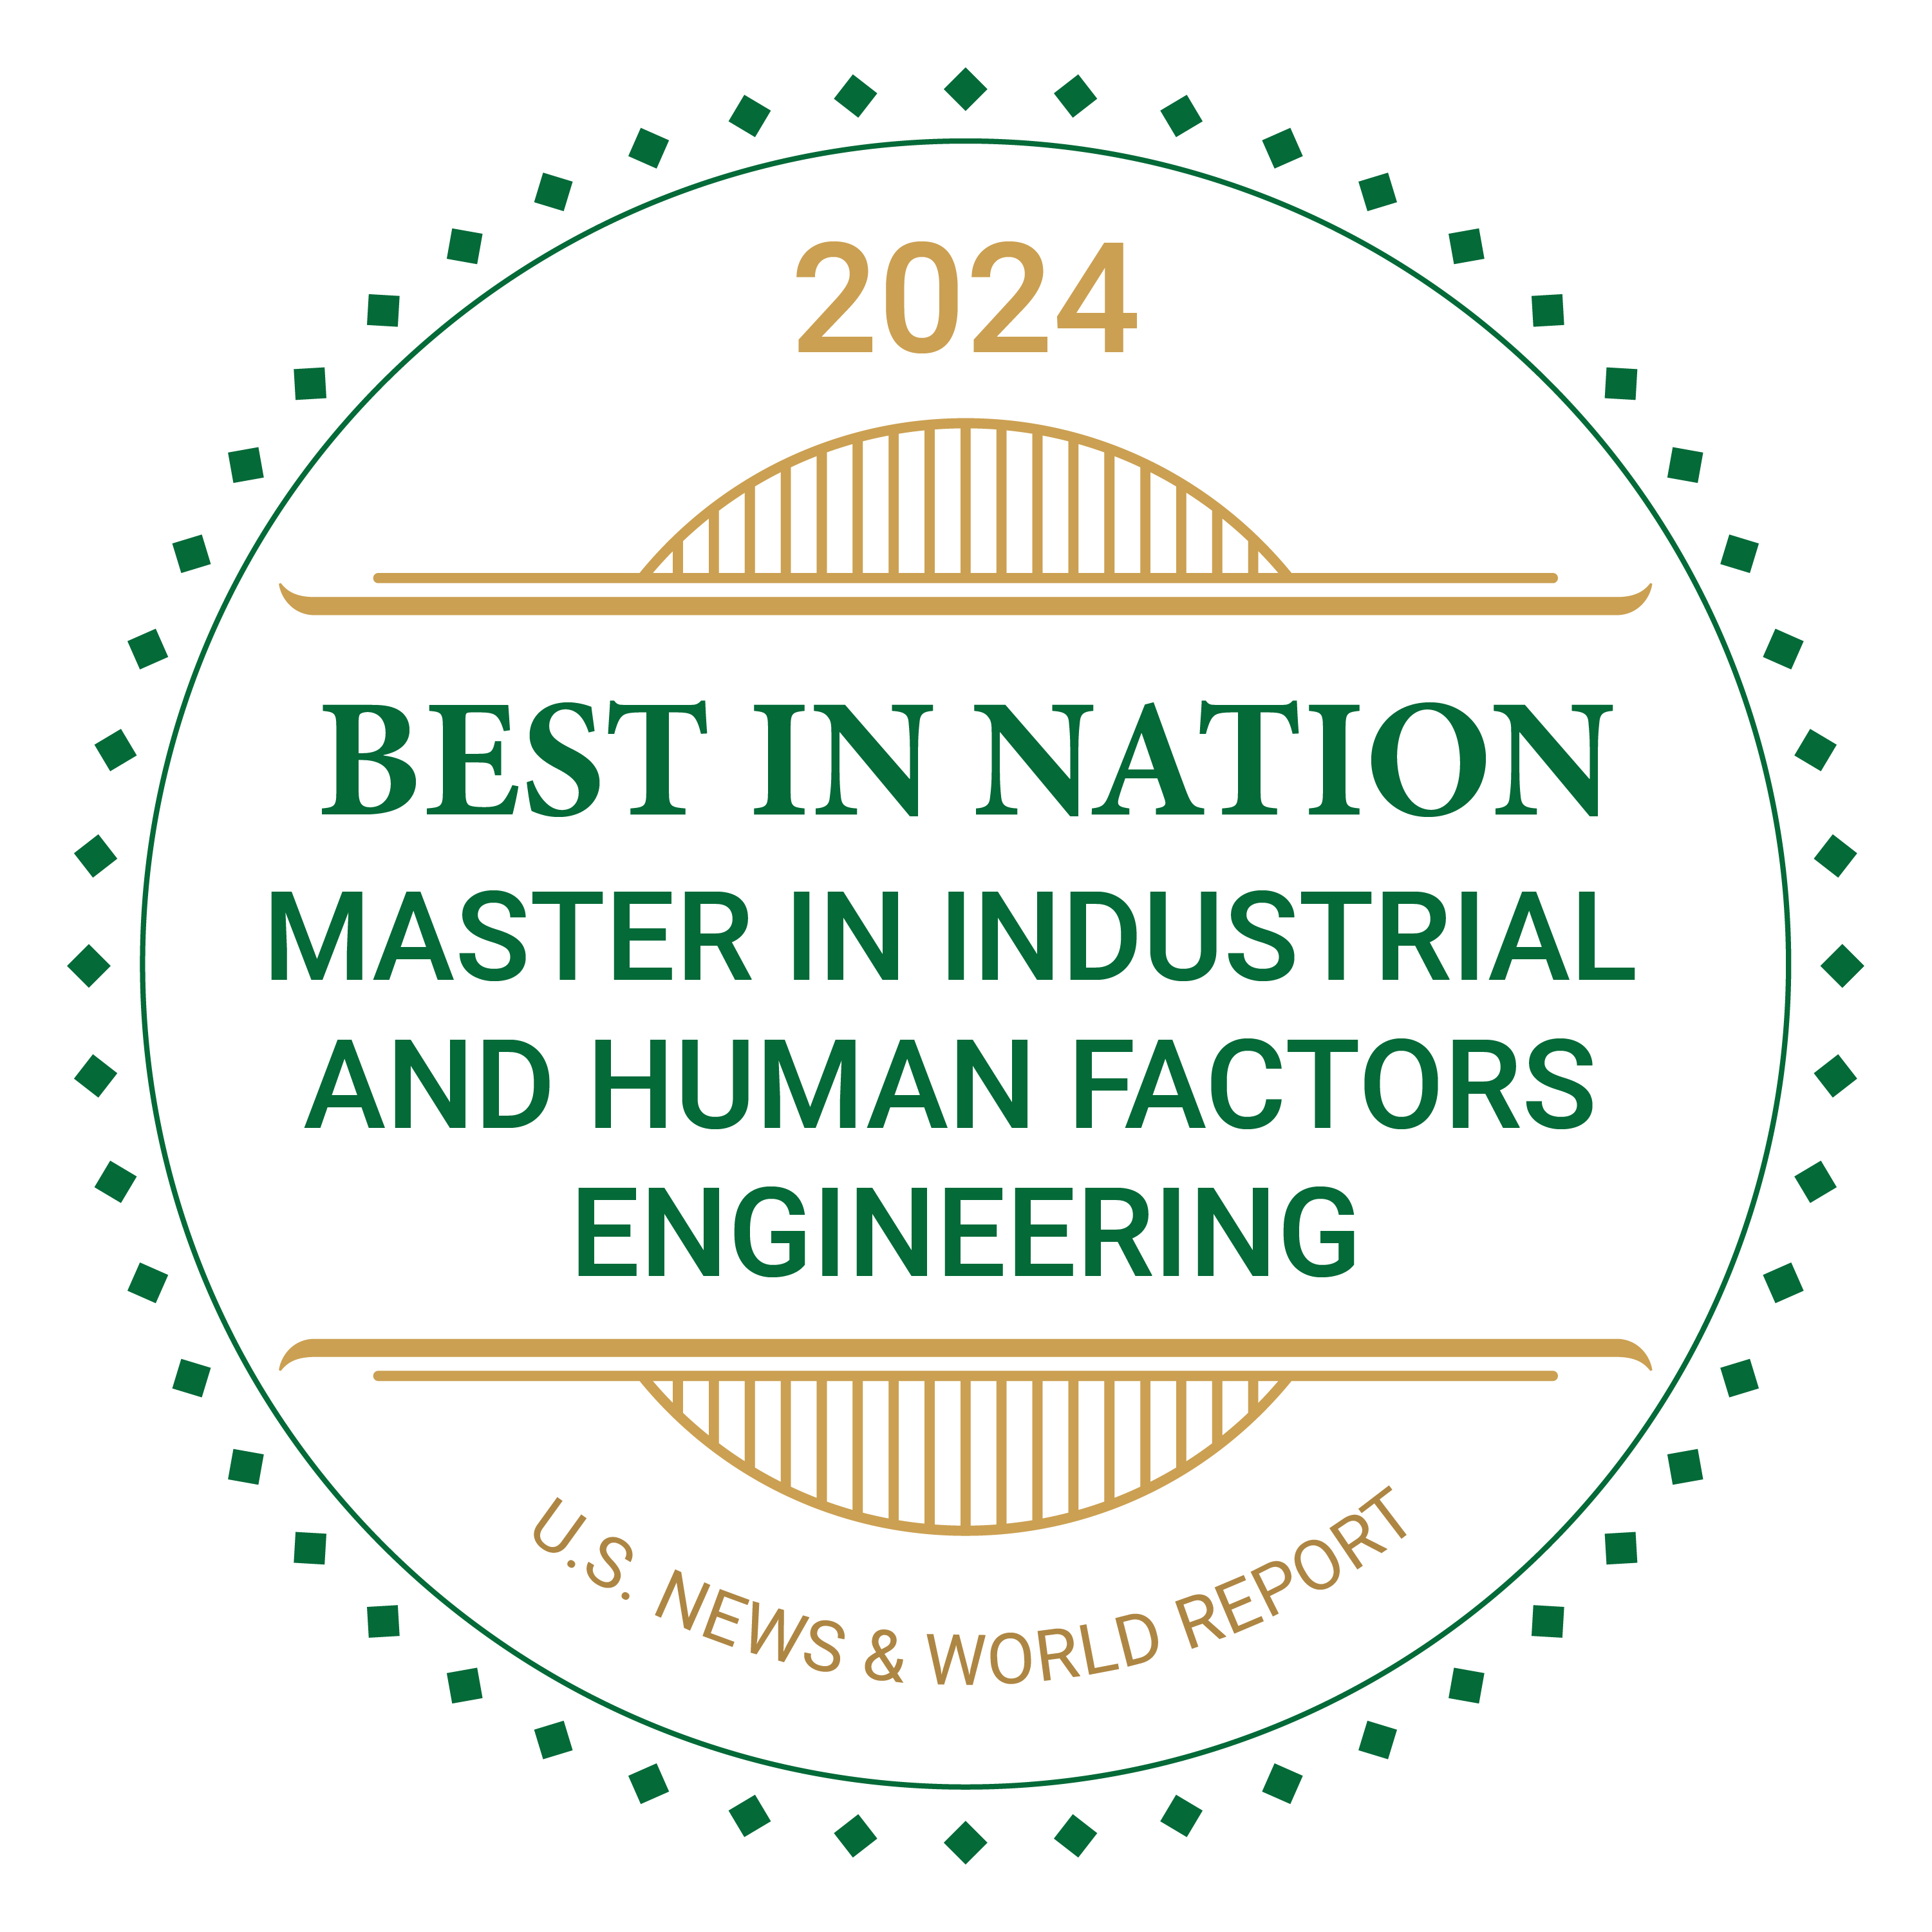 2023 best in nation master in industrial and human factors engineering